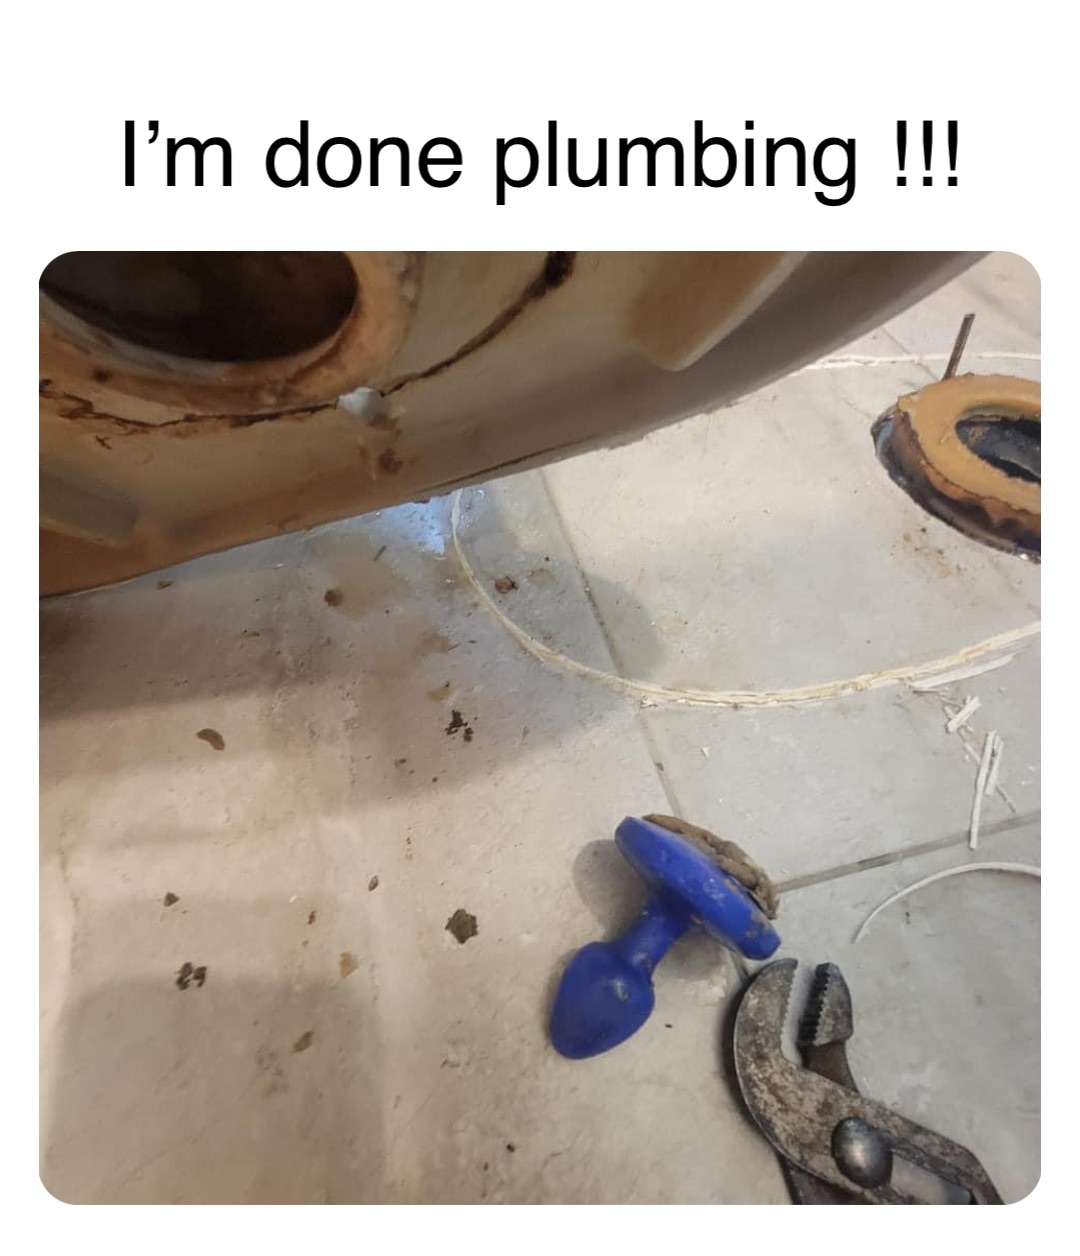 Double tap to edit I’m done plumbing !!!